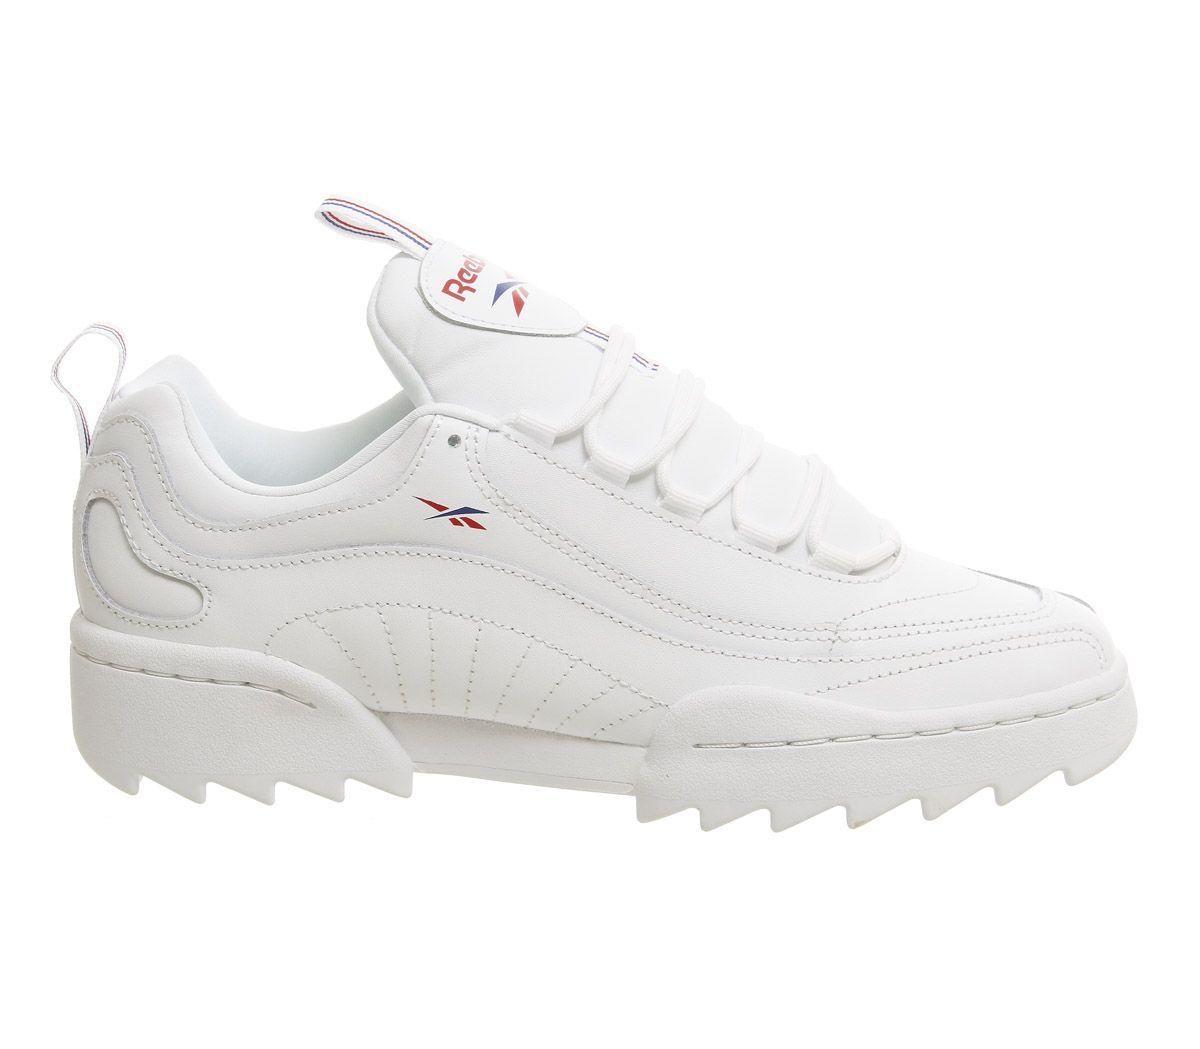 reebok rivyx ripple white > Up to 70% OFF > In stock